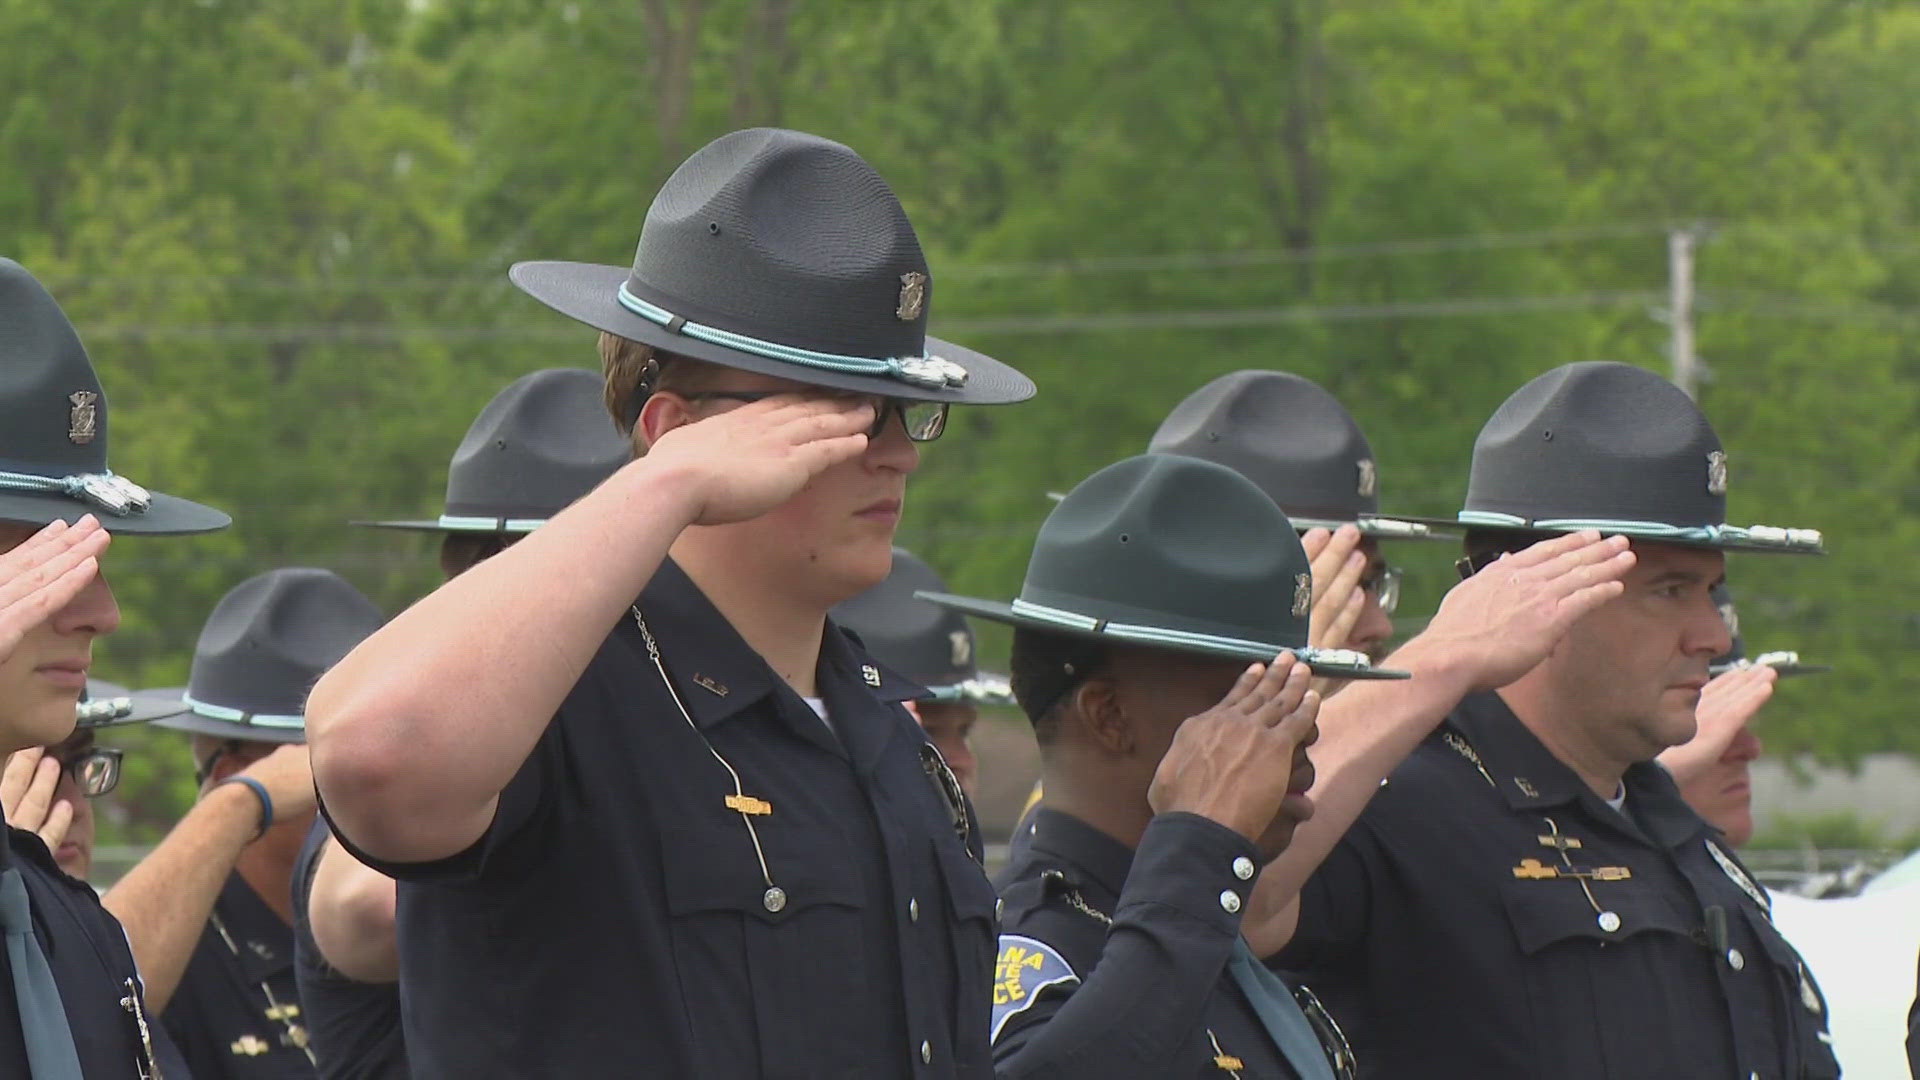 This year, Trooper Aaron Smith's name was added to the list of troopers killed in the line of duty. He died last June while deploying stop sticks.